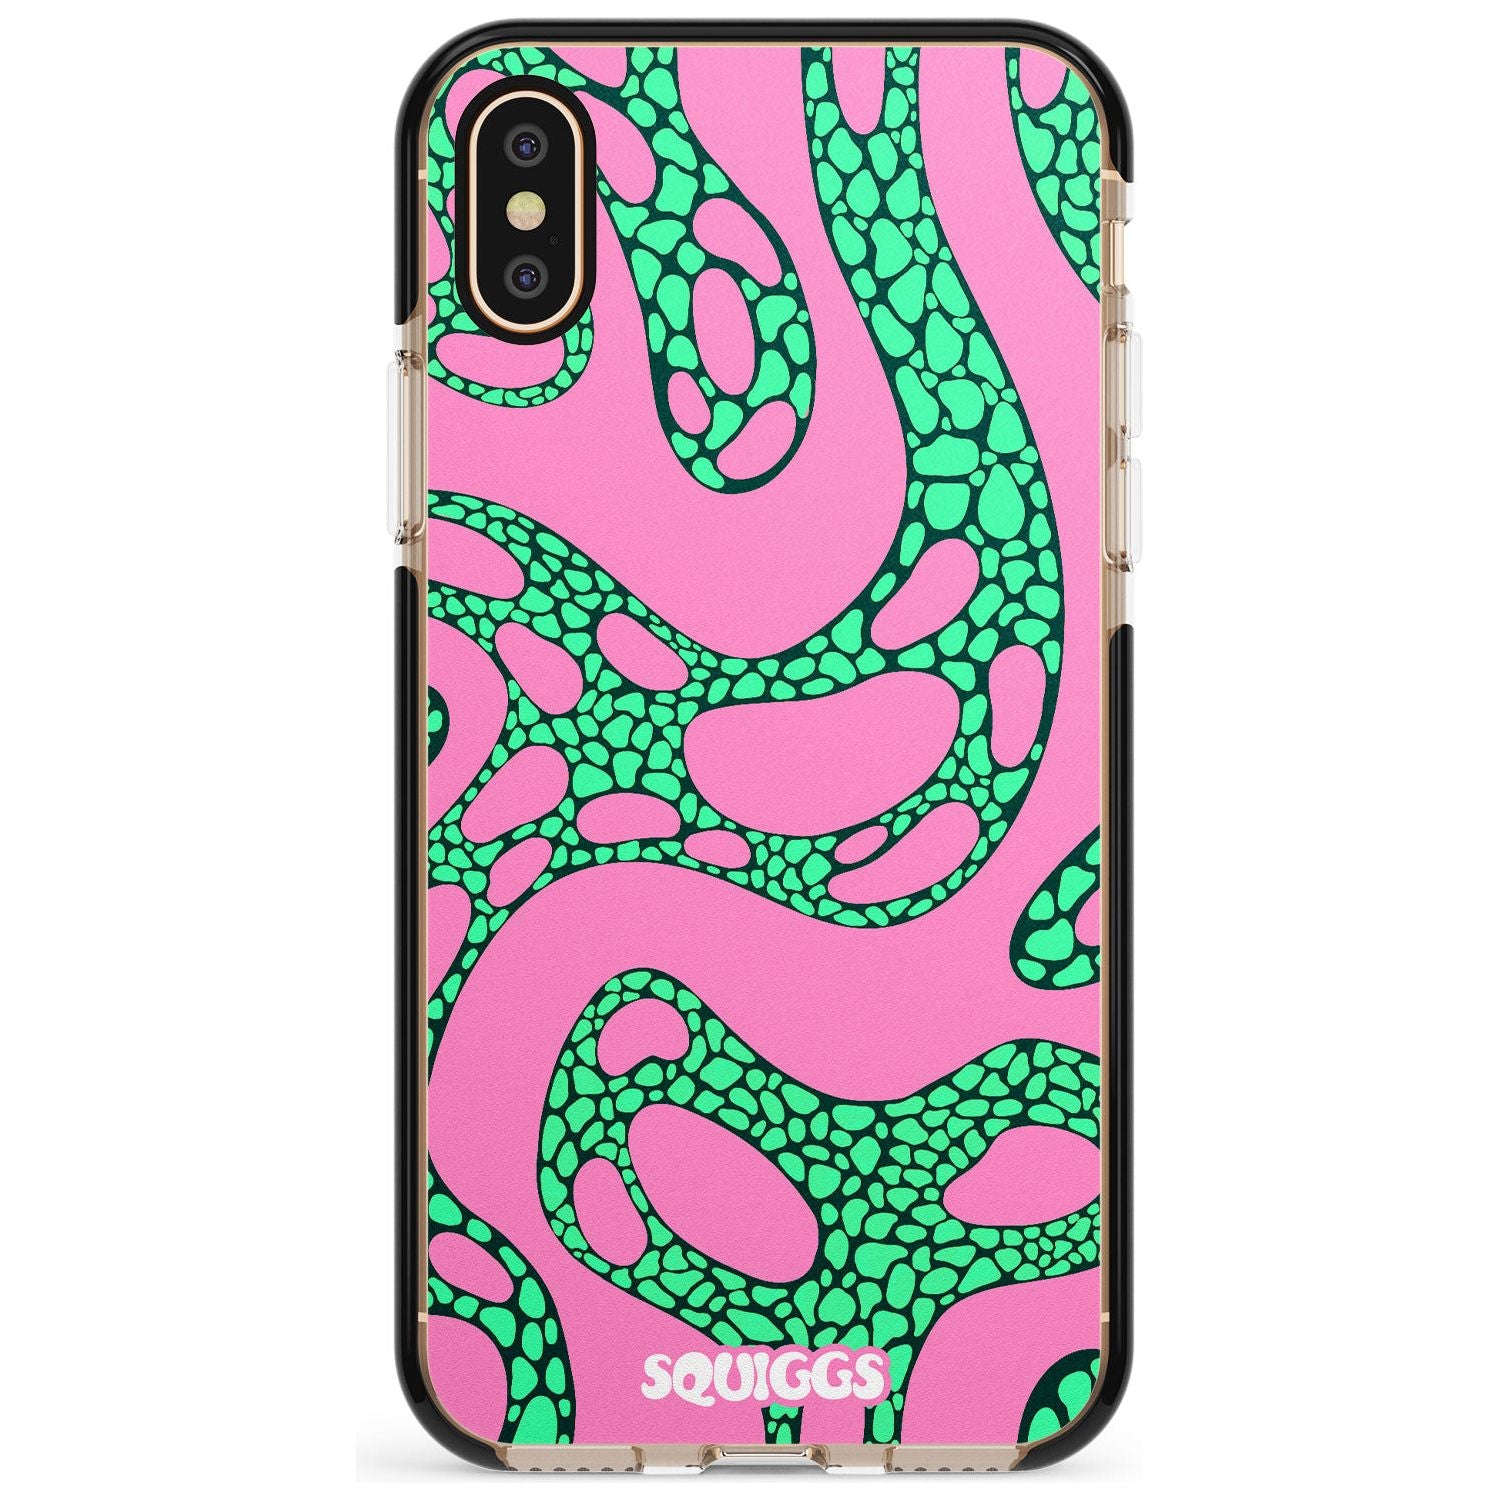 Alien Glow Pink Fade Impact Phone Case for iPhone X XS Max XR